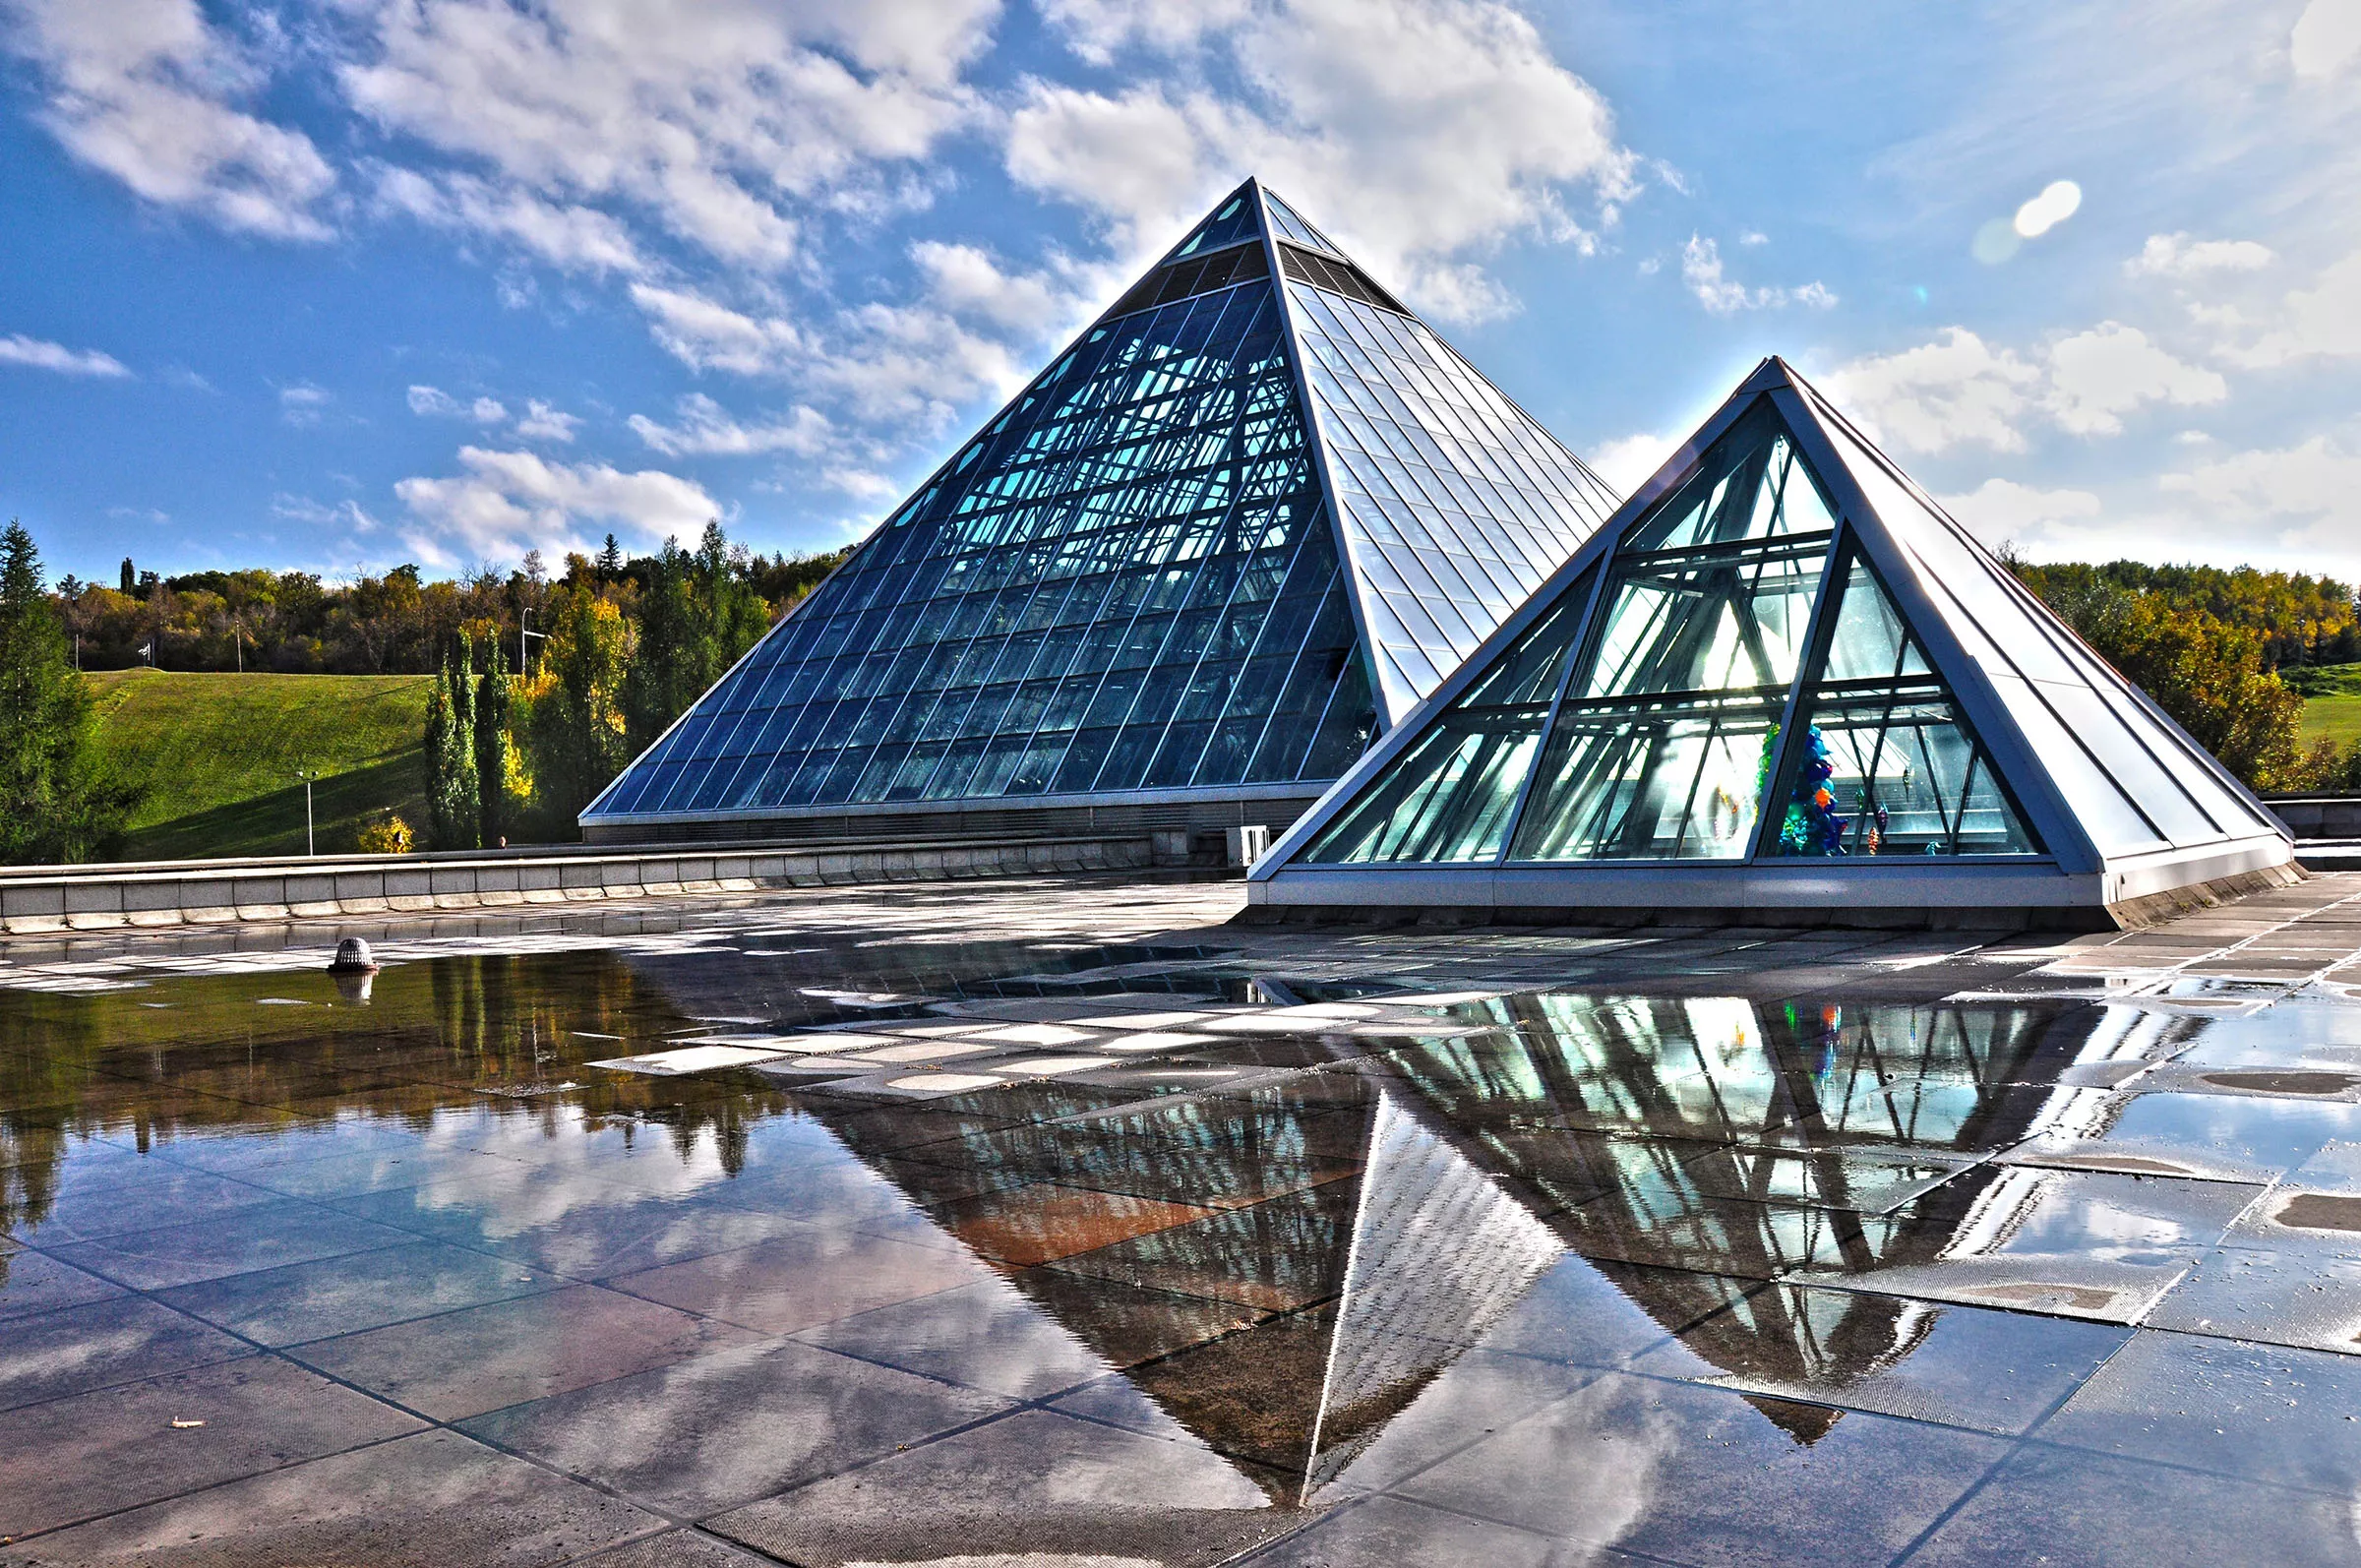 Mattart Conservatory in Canada, North America | Botanical Gardens - Rated 3.7